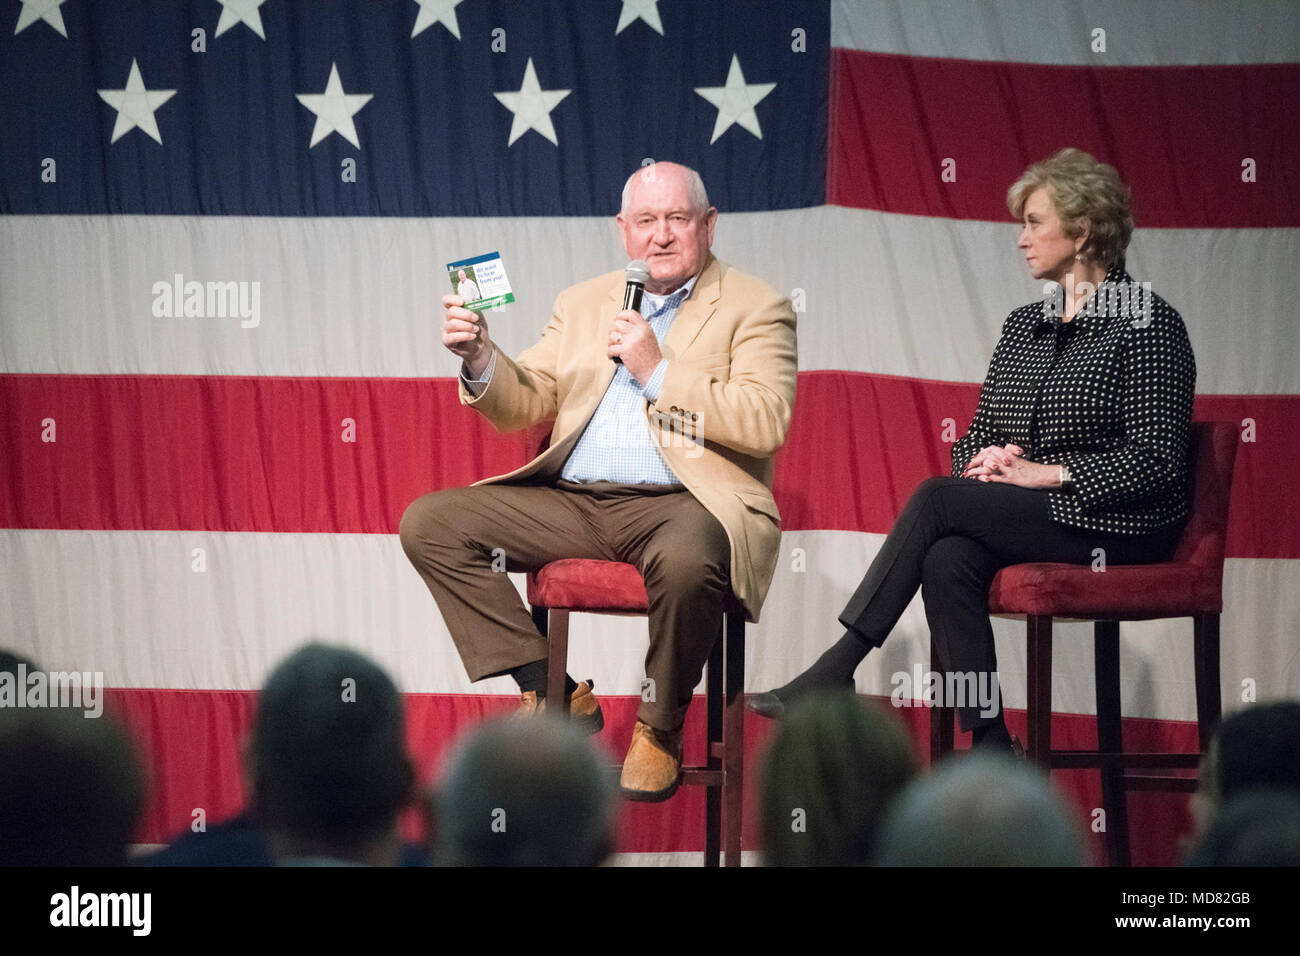 U.S. Secretary of Agriculture Sonny Perdue and Small Business Administration (SBA) Administrator Linda McMahon, take part in a working lunch and conversation with the Lima Chamber of Commerce, and Ohio Farm Bureau, in Lima, OH, on April 4, 2018. This is part of the Third &quot;Back to our Roots&quot; RV tour.  “As always, our ‘Back to our Roots’ RV tour is an opportunity to get out of Washington, D.C. to hear directly from the American people in the agriculture community,” Secretary Perdue said. “While Congress continues its work on the Farm Bill, rural prosperity, and many other agriculture p Stock Photo